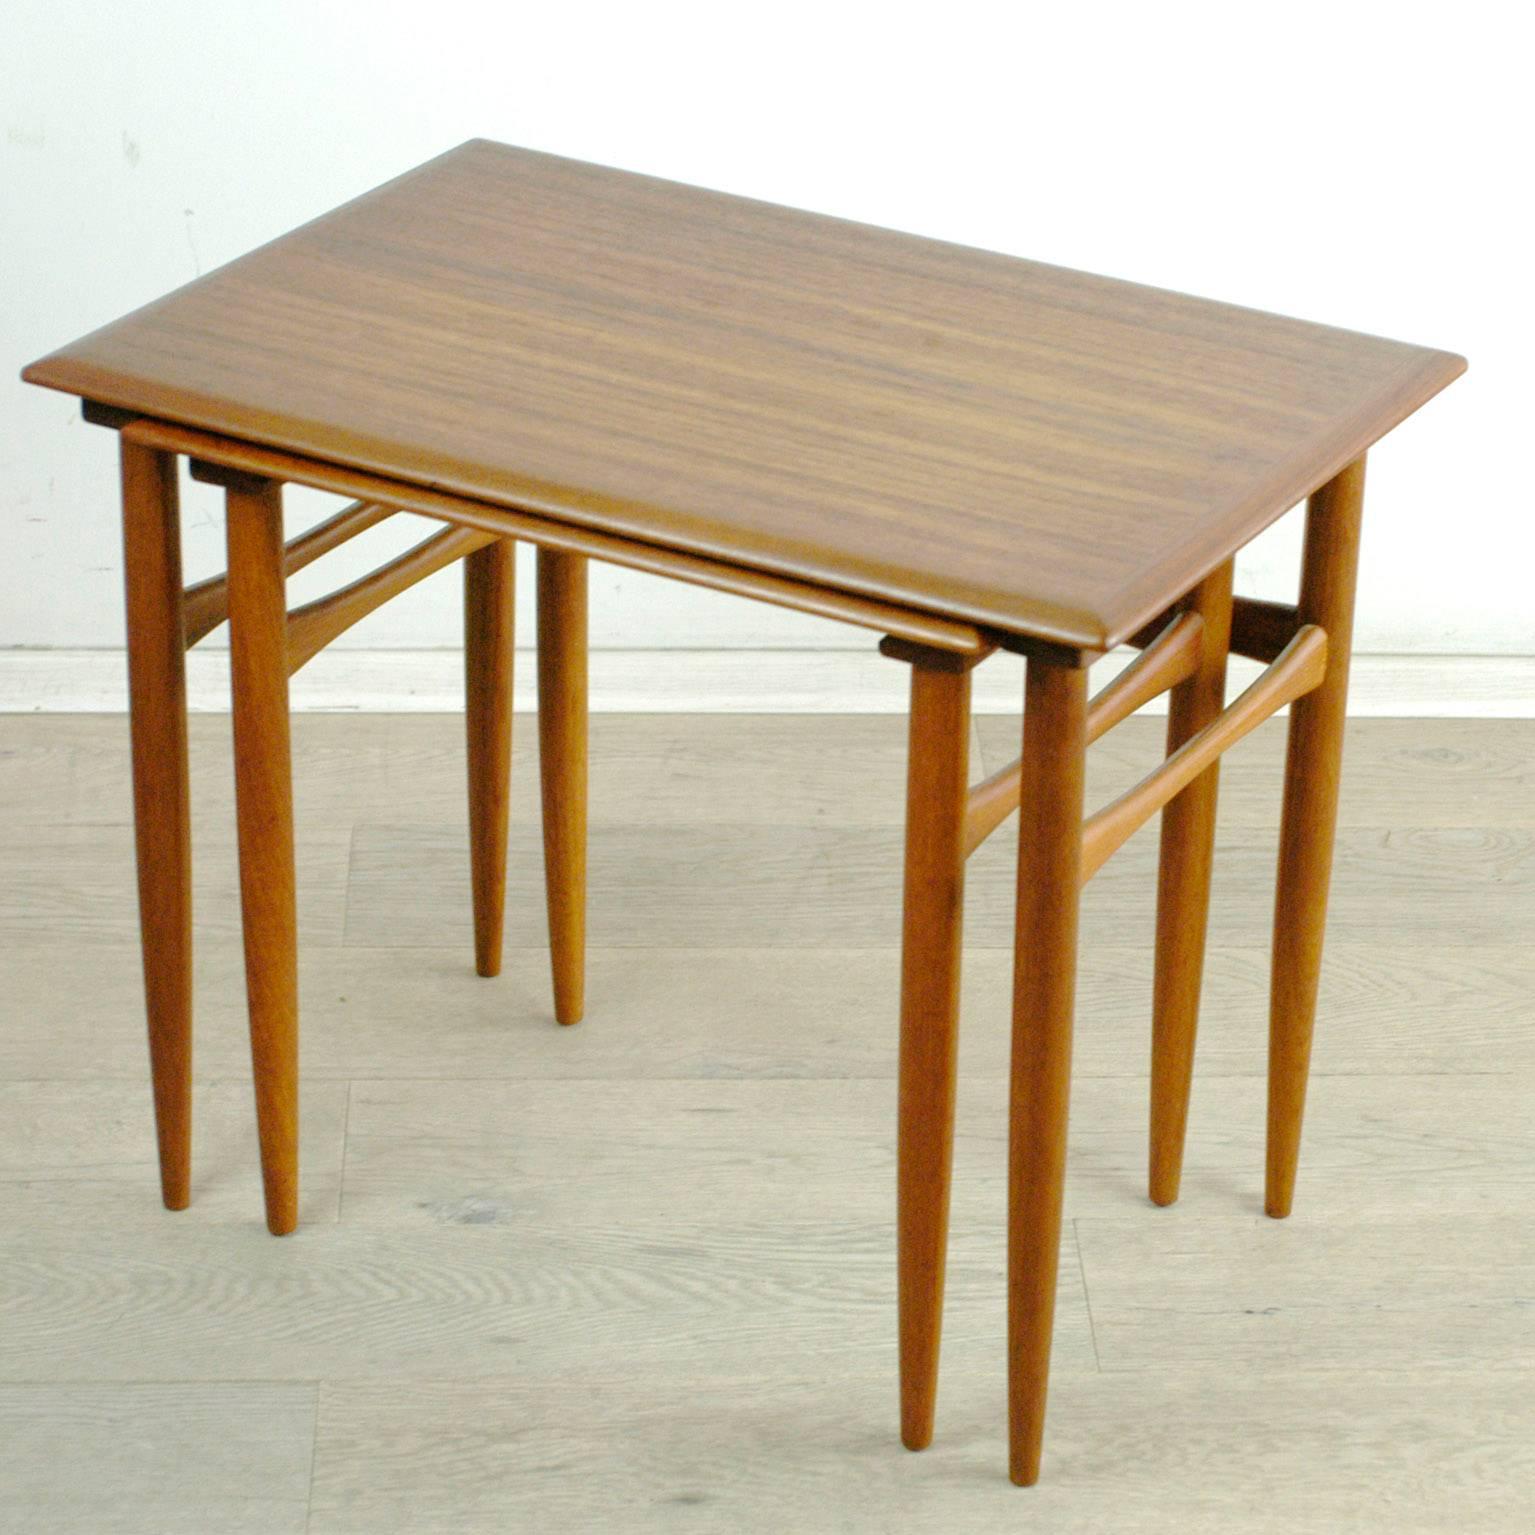 Set of two charming Scandinavian Modern nesting tables in excellent condition. Perfect addition to any modernist interior!